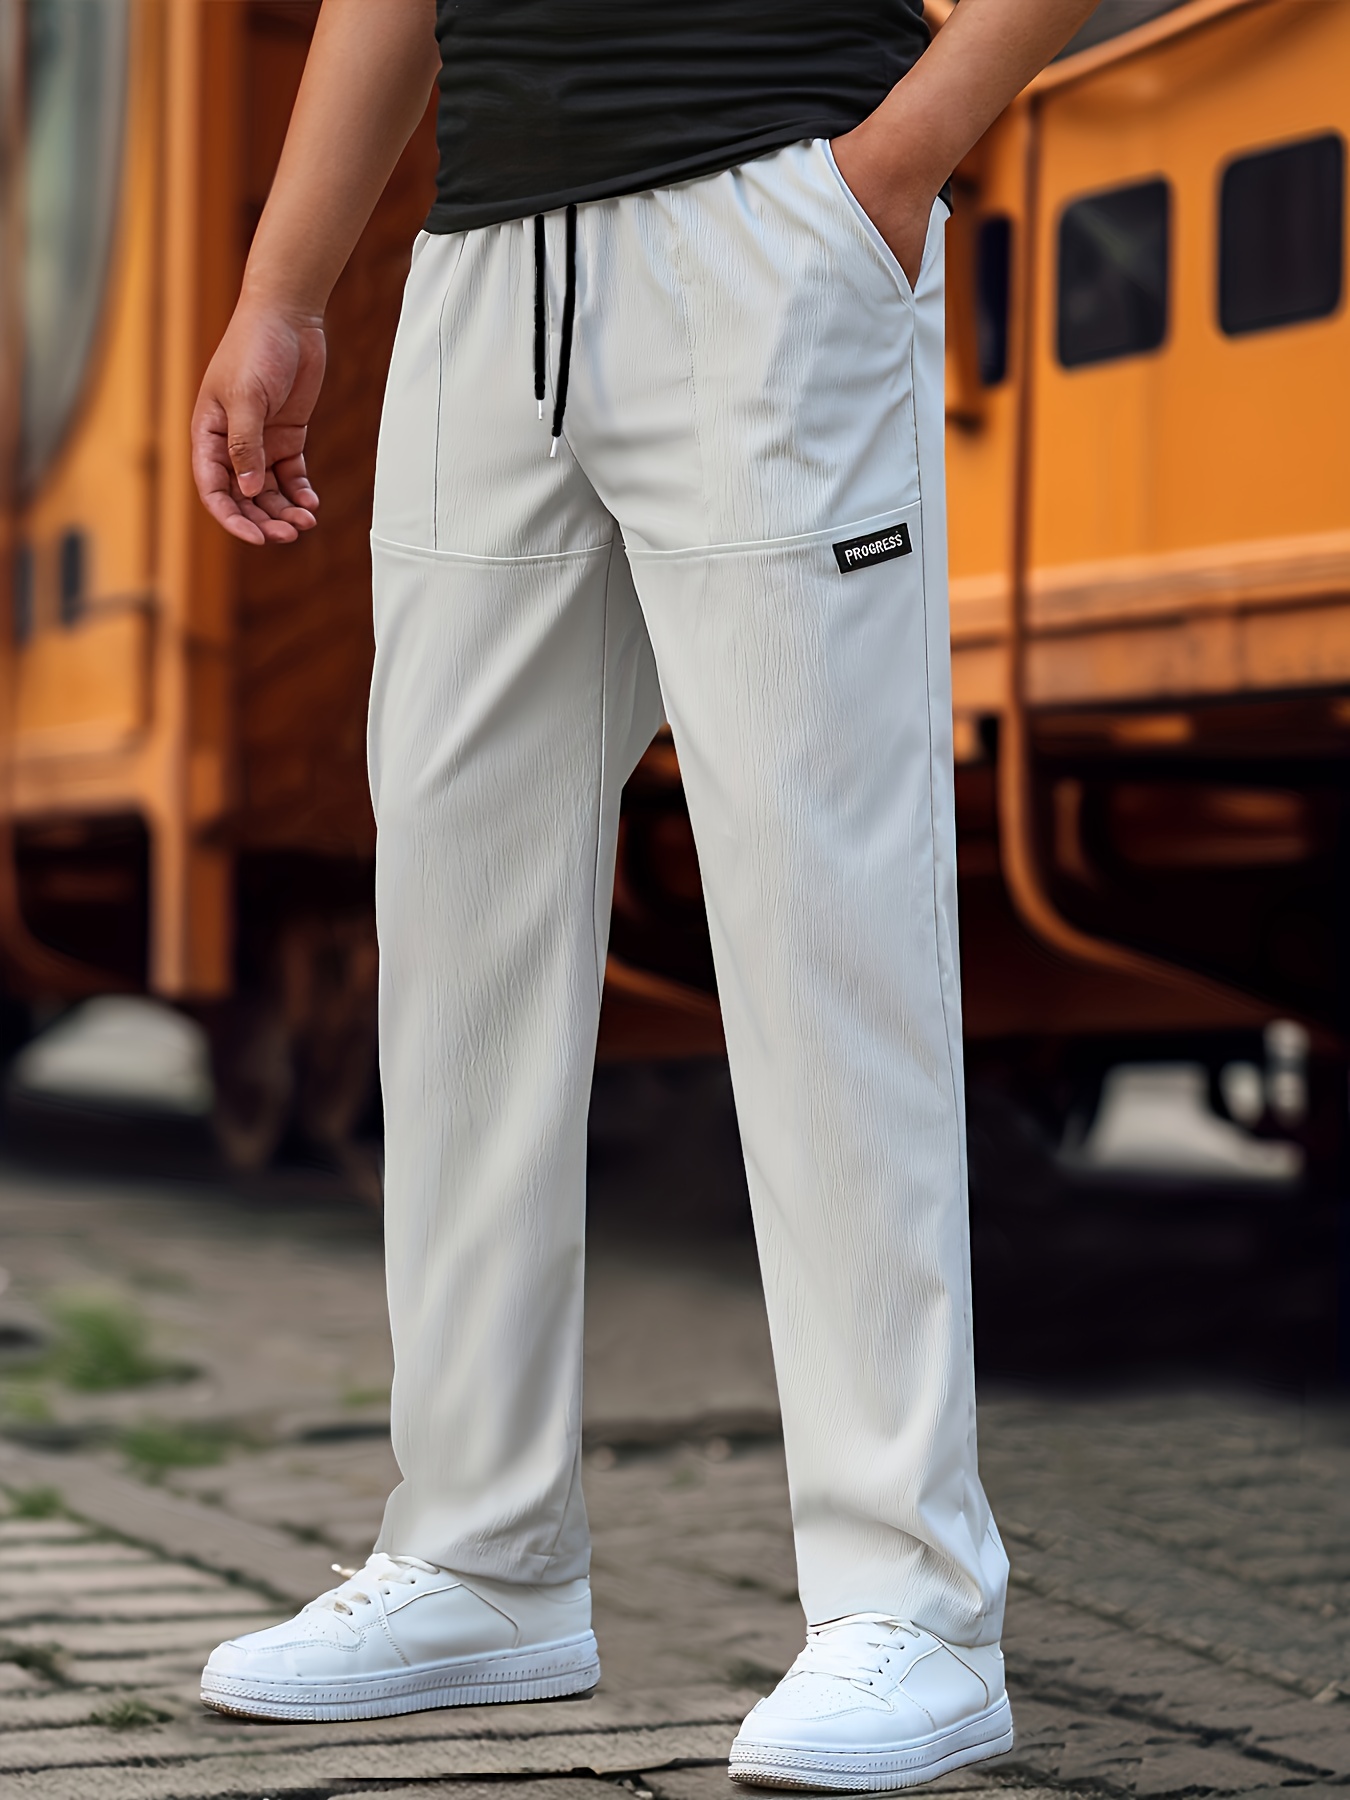 Men's Casual Joggers, Chic Waist Drawstring Sports Pants For Fitness  Basketball